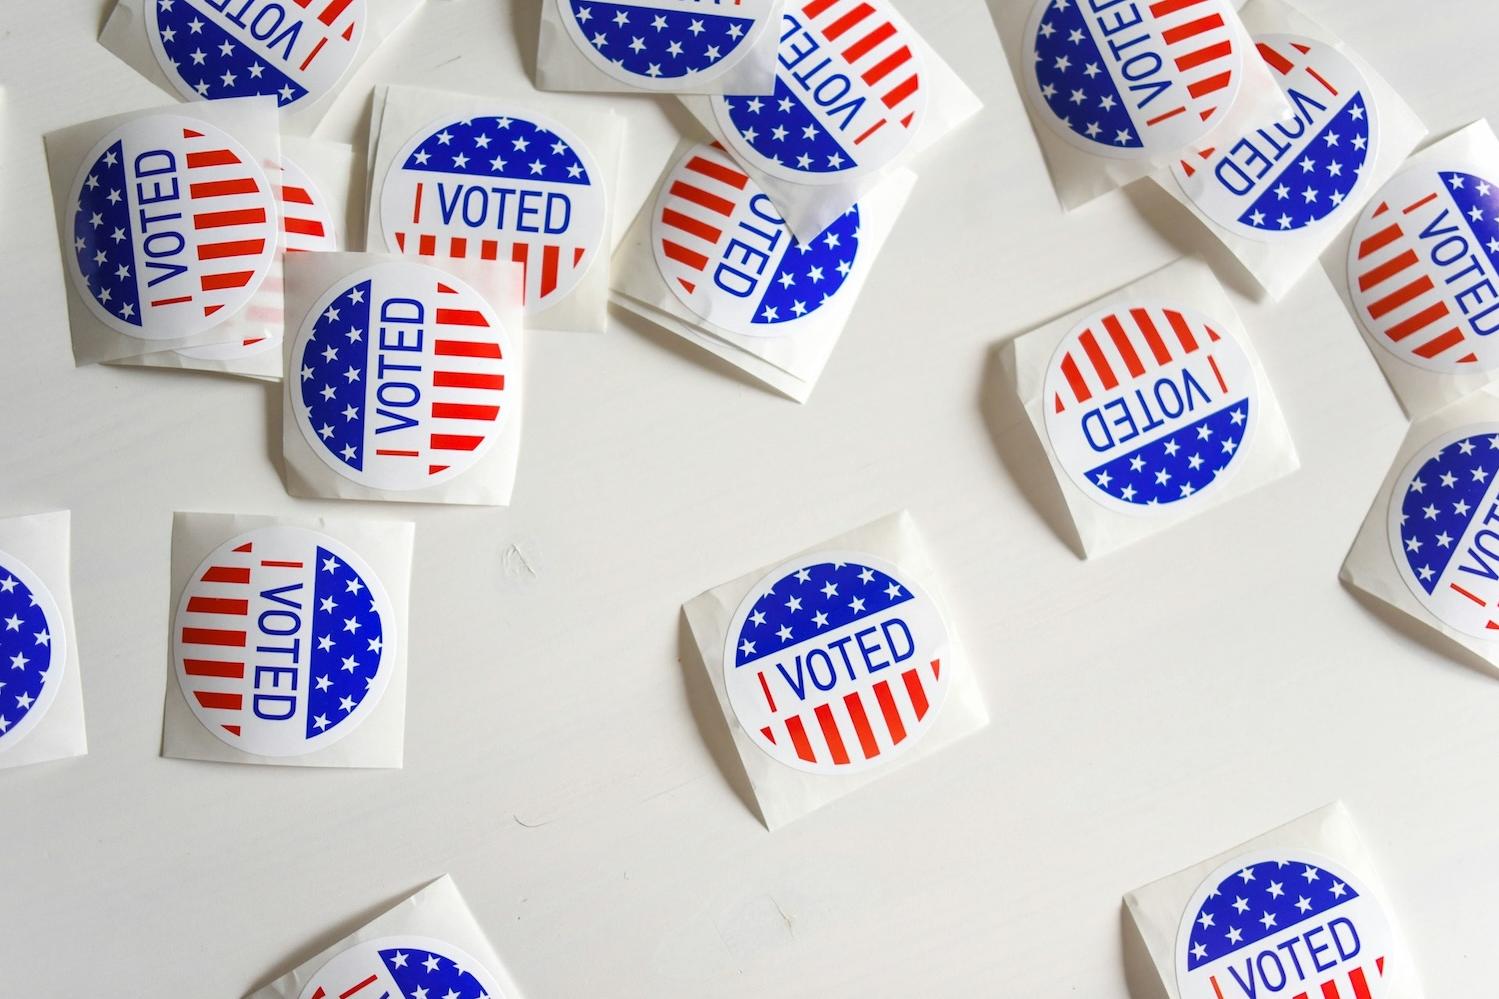 I voted stickers — how brands can support free and fair elections in the U.S.